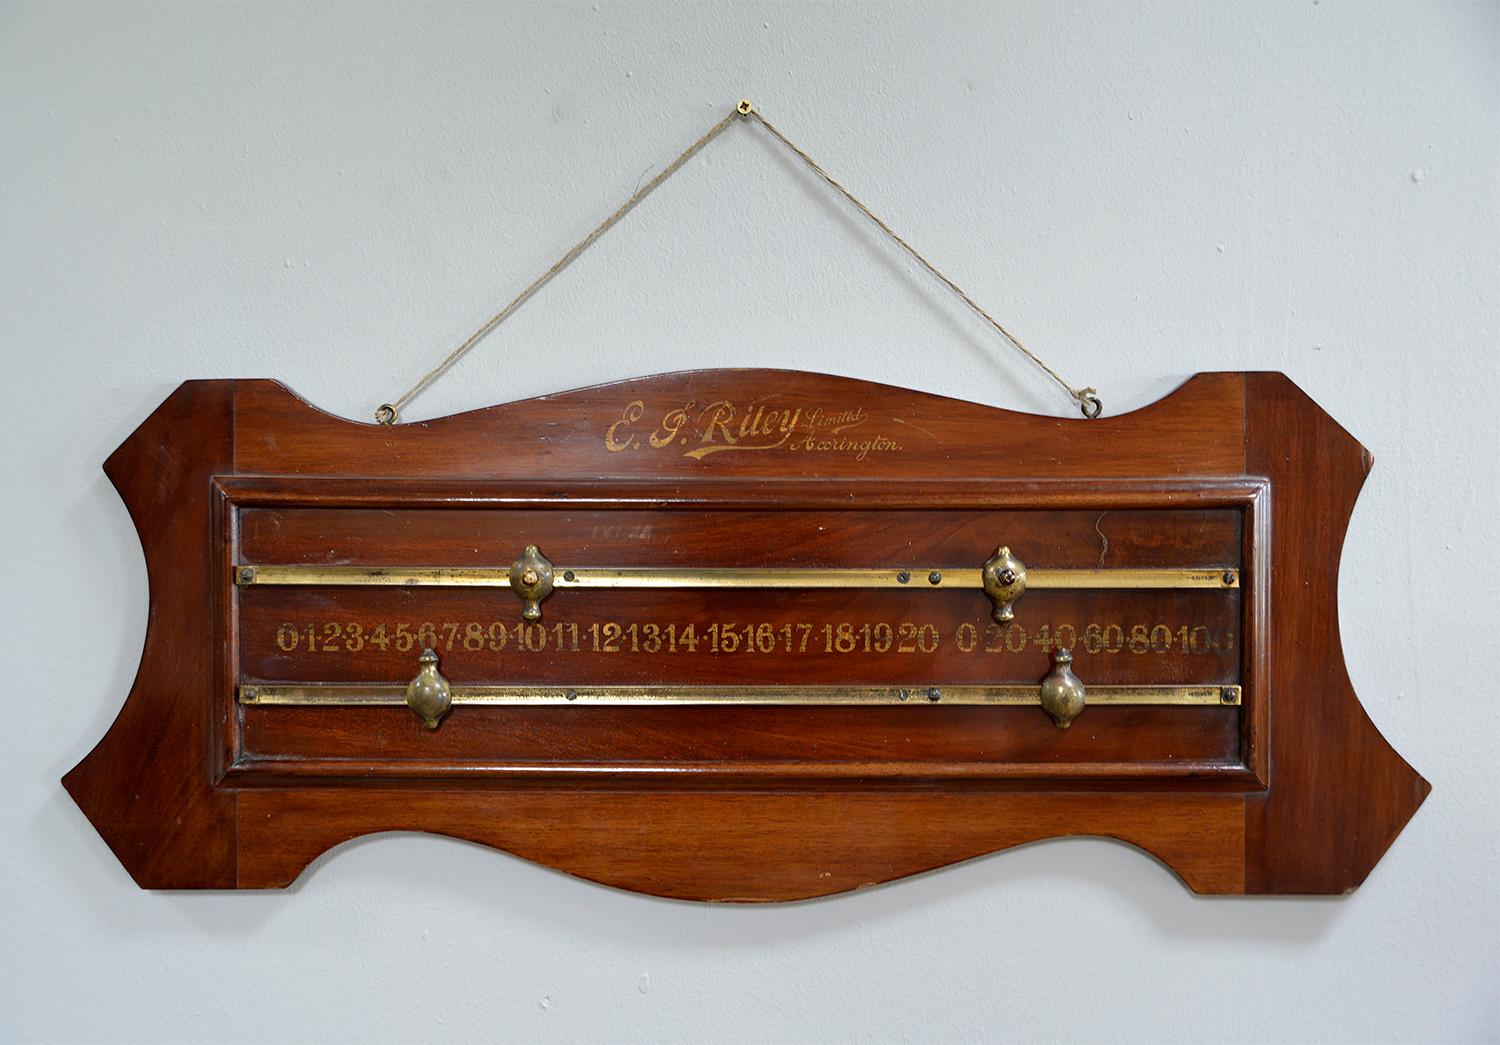 A lovely shaped mahogany billiard scoreboard in original condition with gold numbering and gold painted name “E J Riley Ltd Accrington” with brass slides and pointers. The transfer numbers are 0 to 20 and 0 to 100. 

During the 1890's E.J. Riley